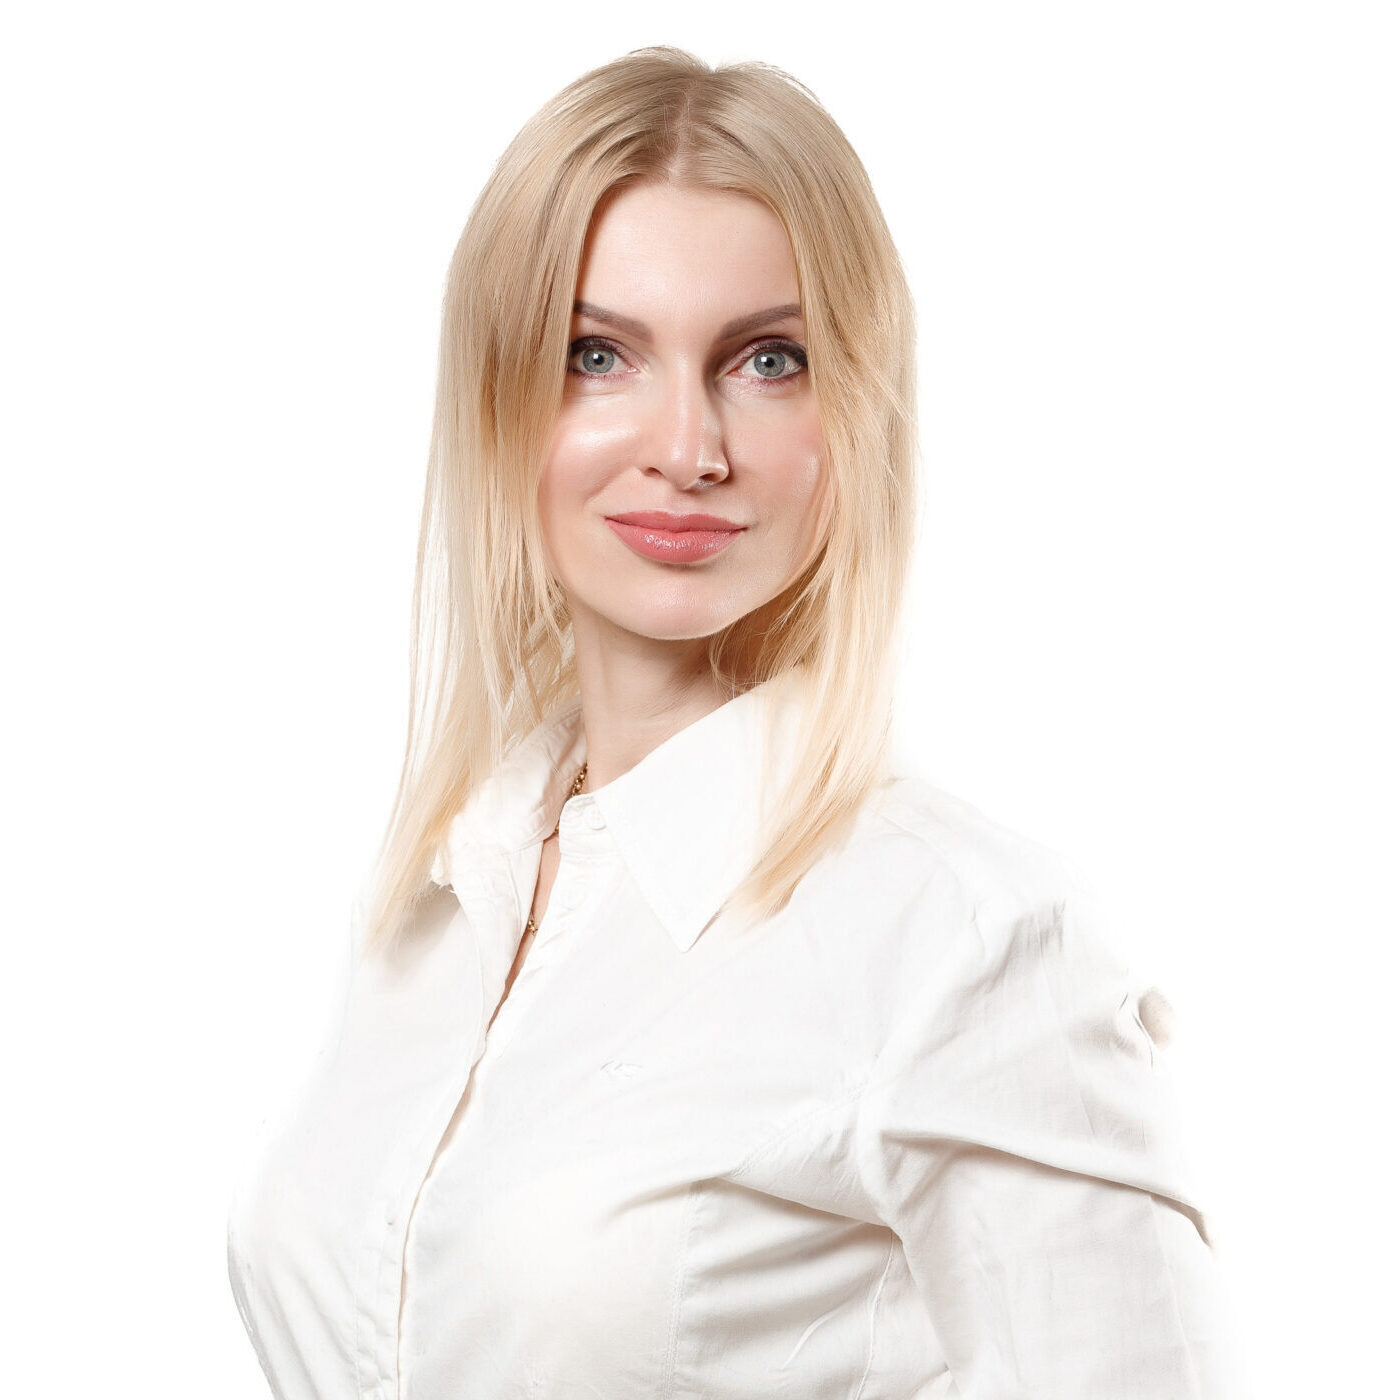 olena-morozova-mentor-project-manager-course